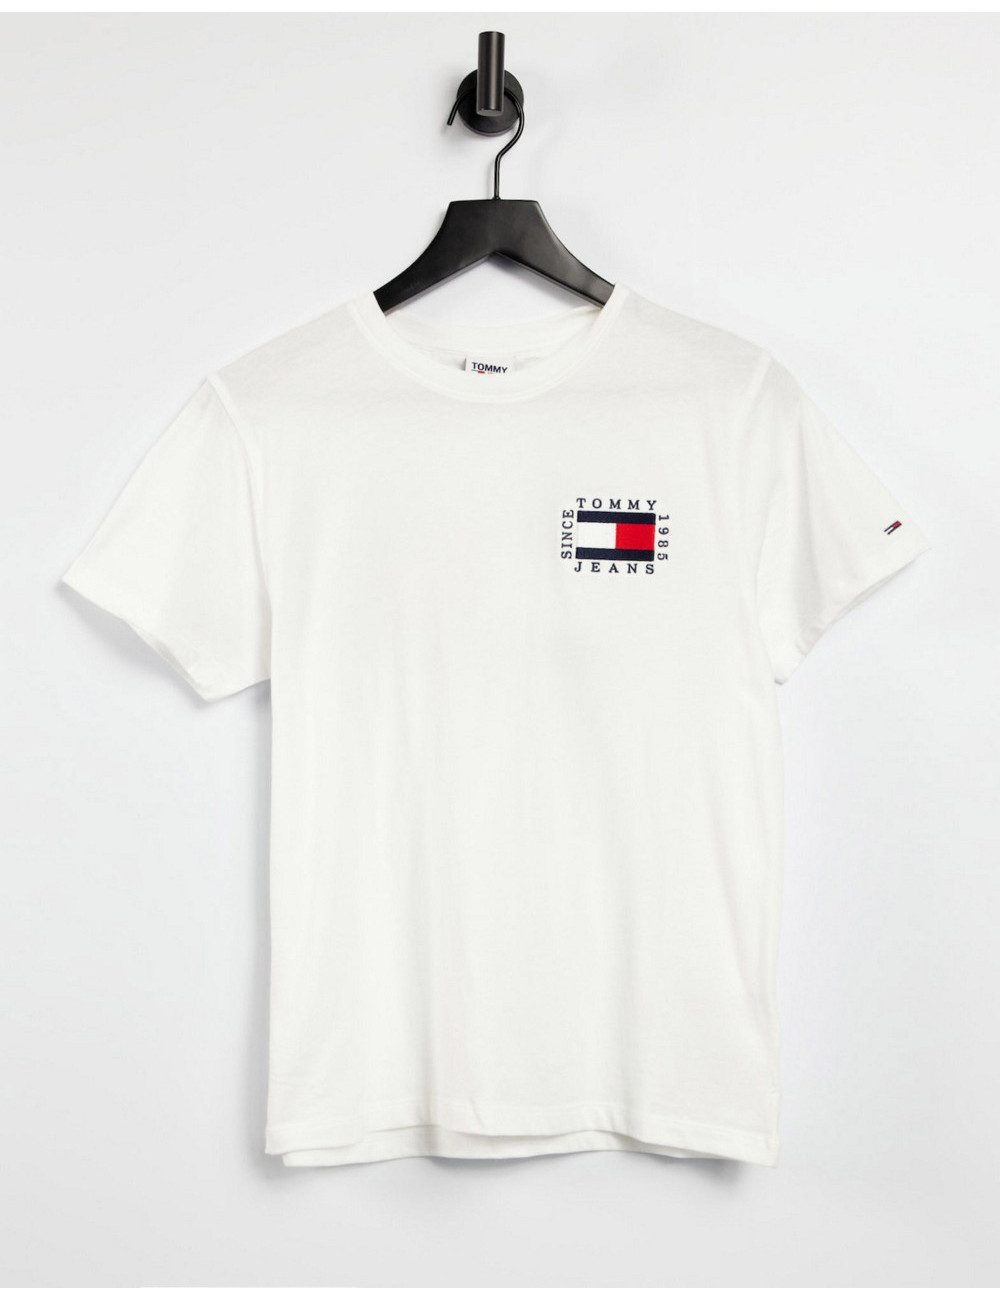 Tommy Jeans flag tee in white